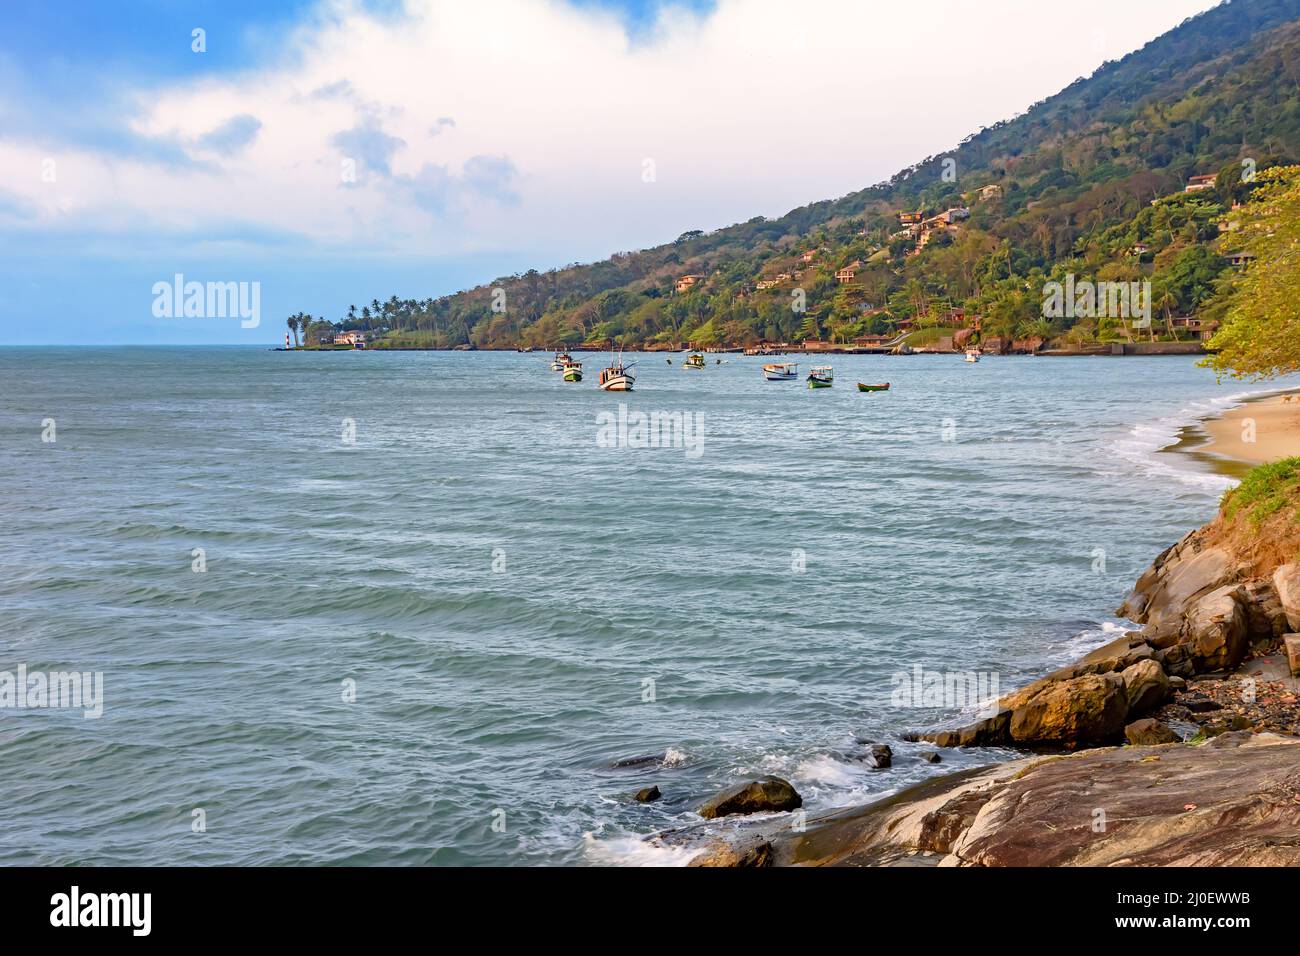 Beach with tropical vegetation and boats over the sea in Ilhabela island Stock Photo